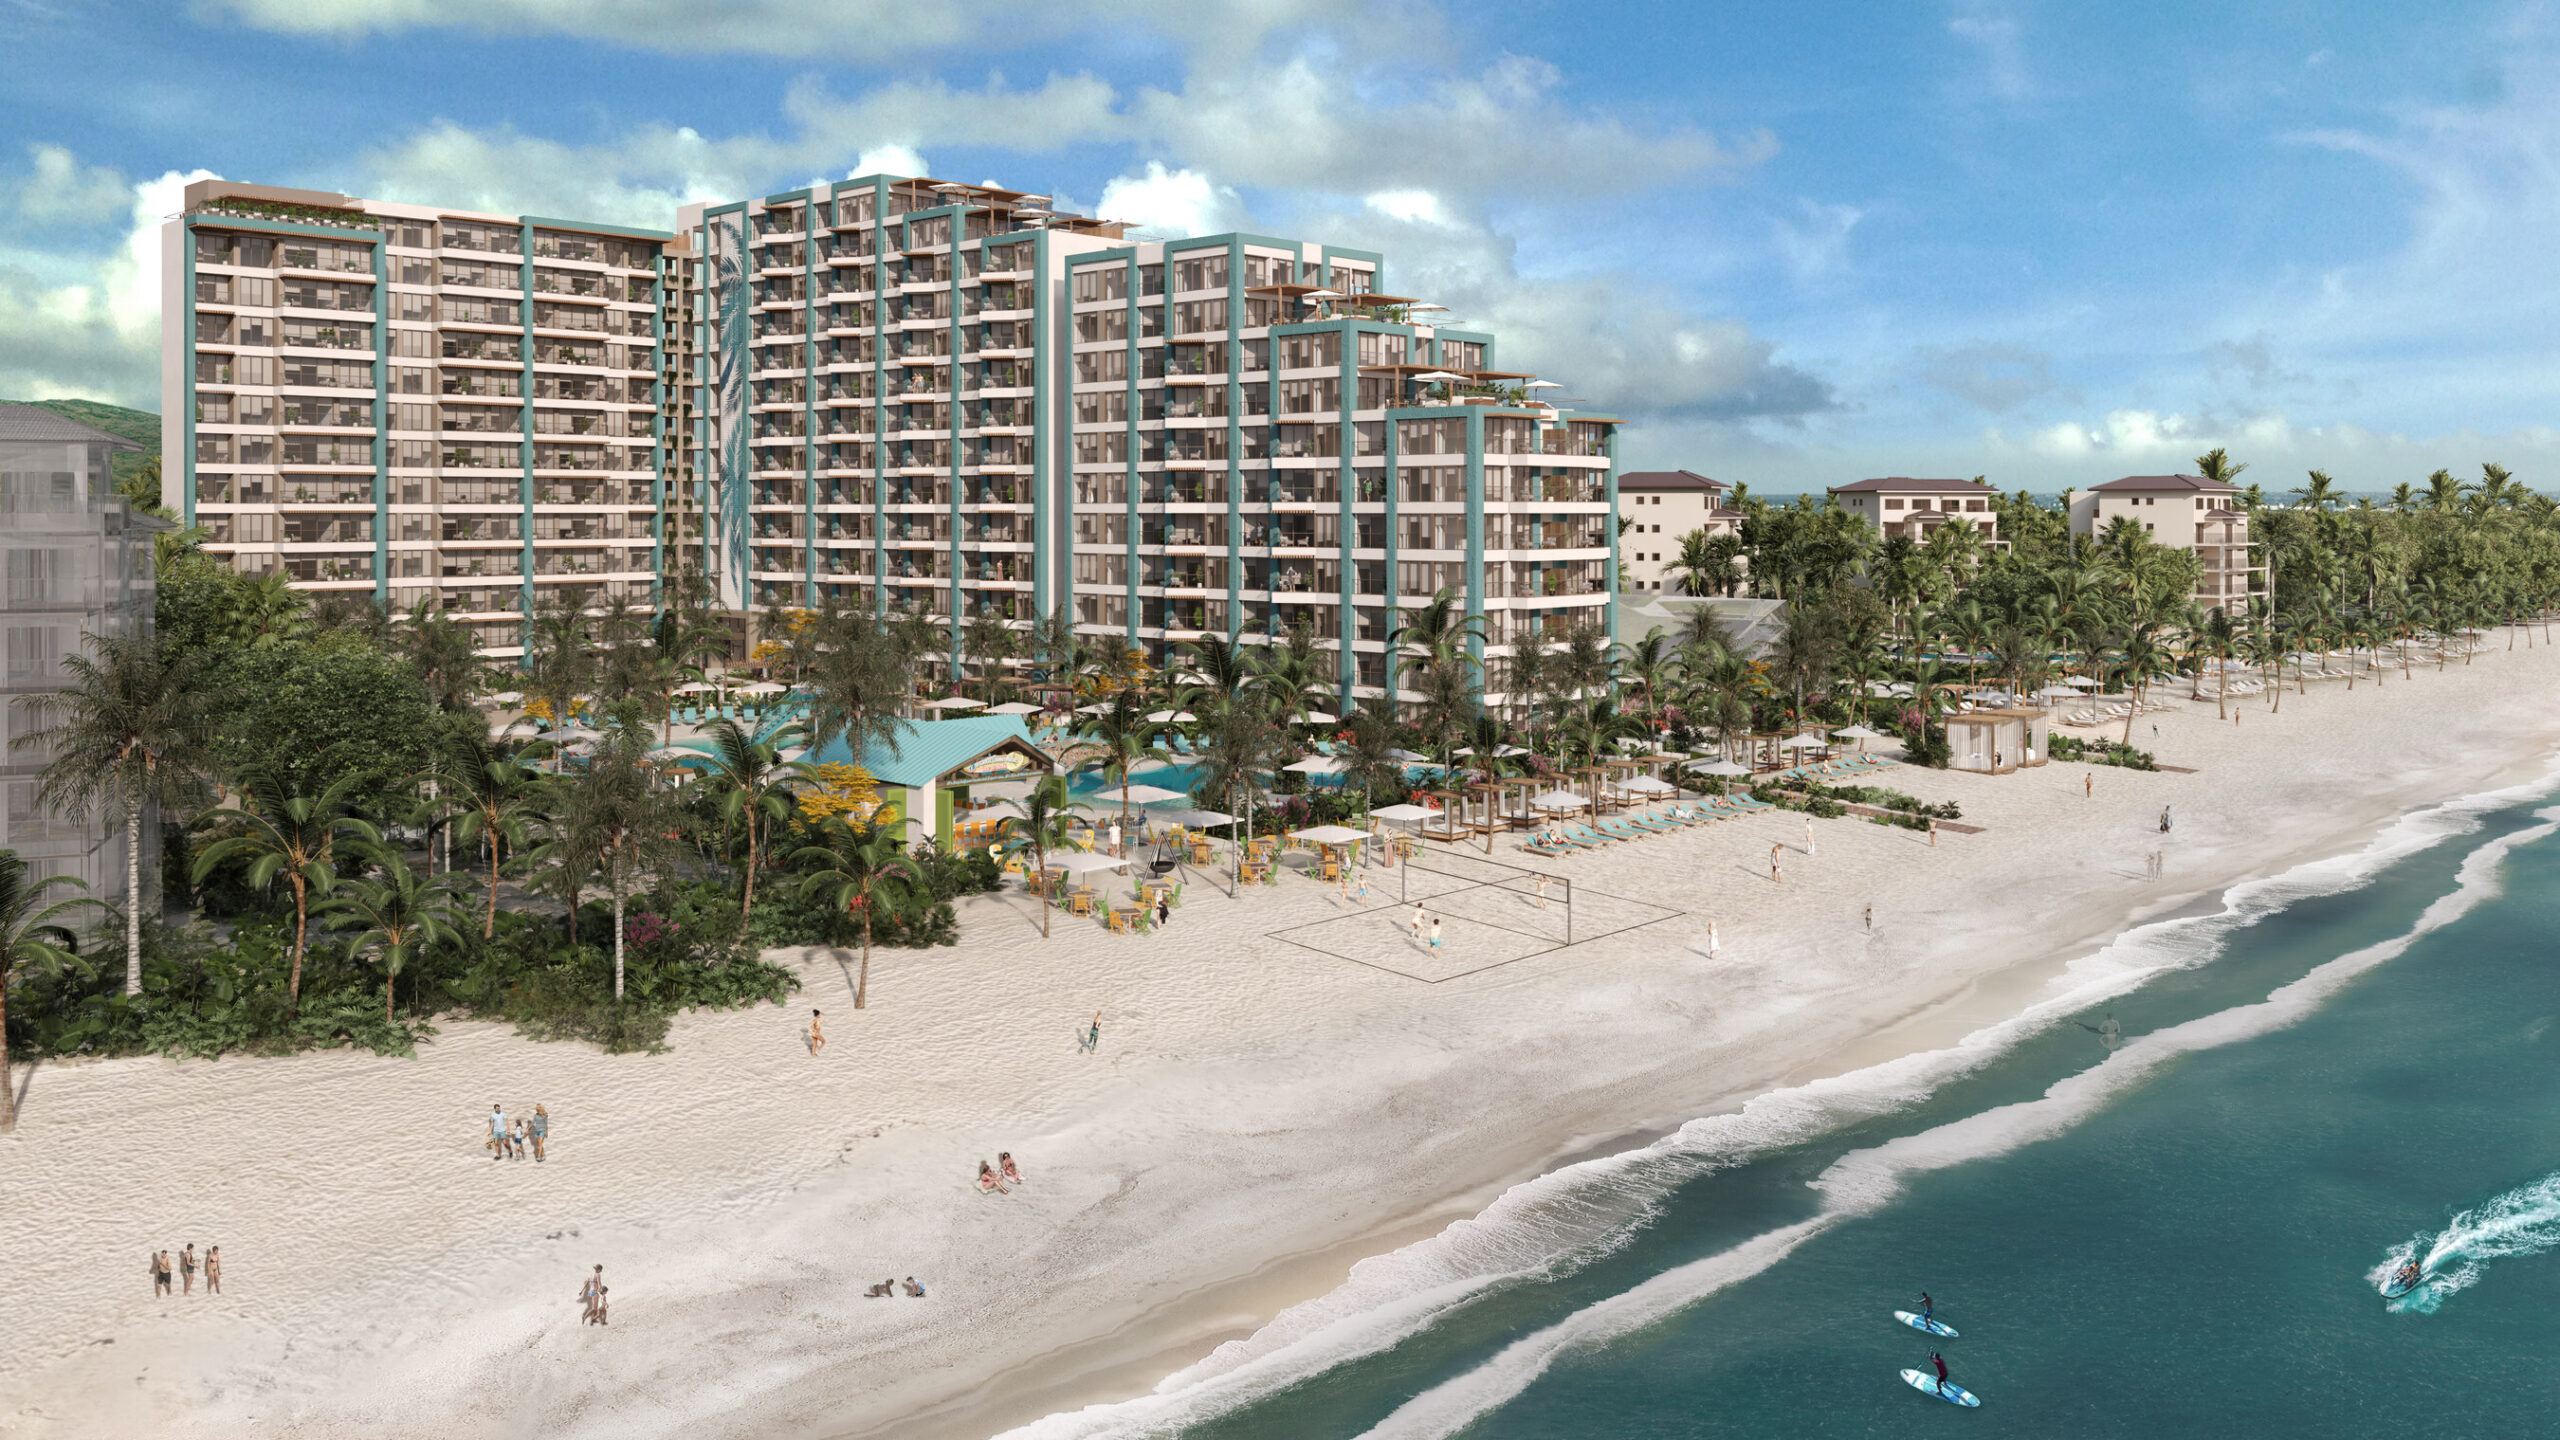 Margaritaville and Grupo Los Pueblos partner to launch Margaritaville Beach Resort & Residences Playa Caracol in Panama, blending local culture with classic amenities, opening mid-2027.